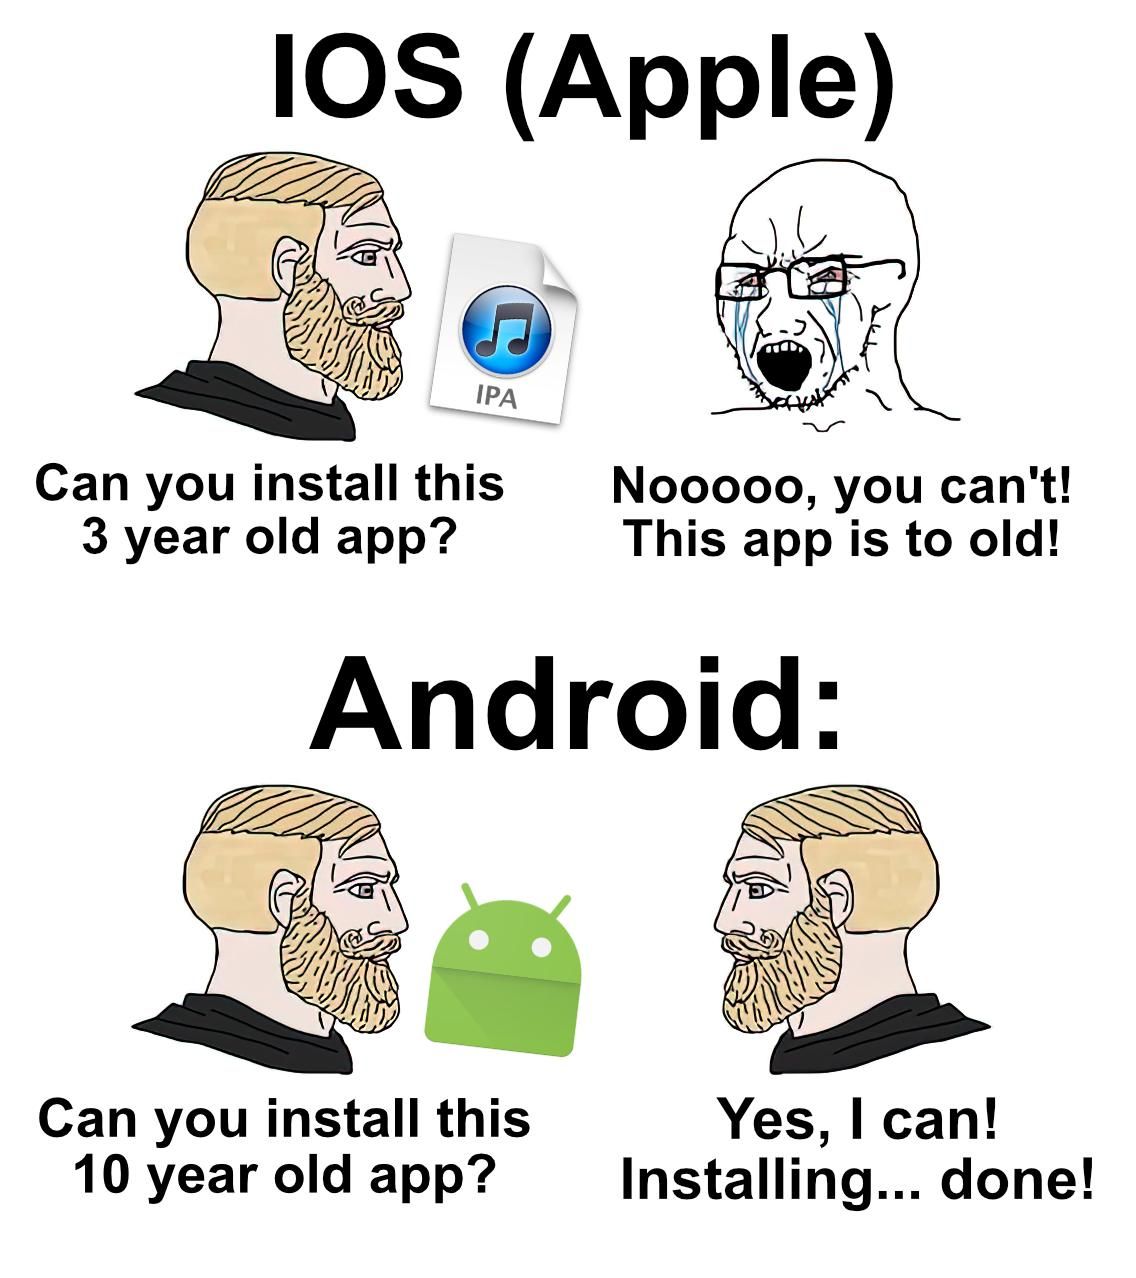 Android compatibility is insane!